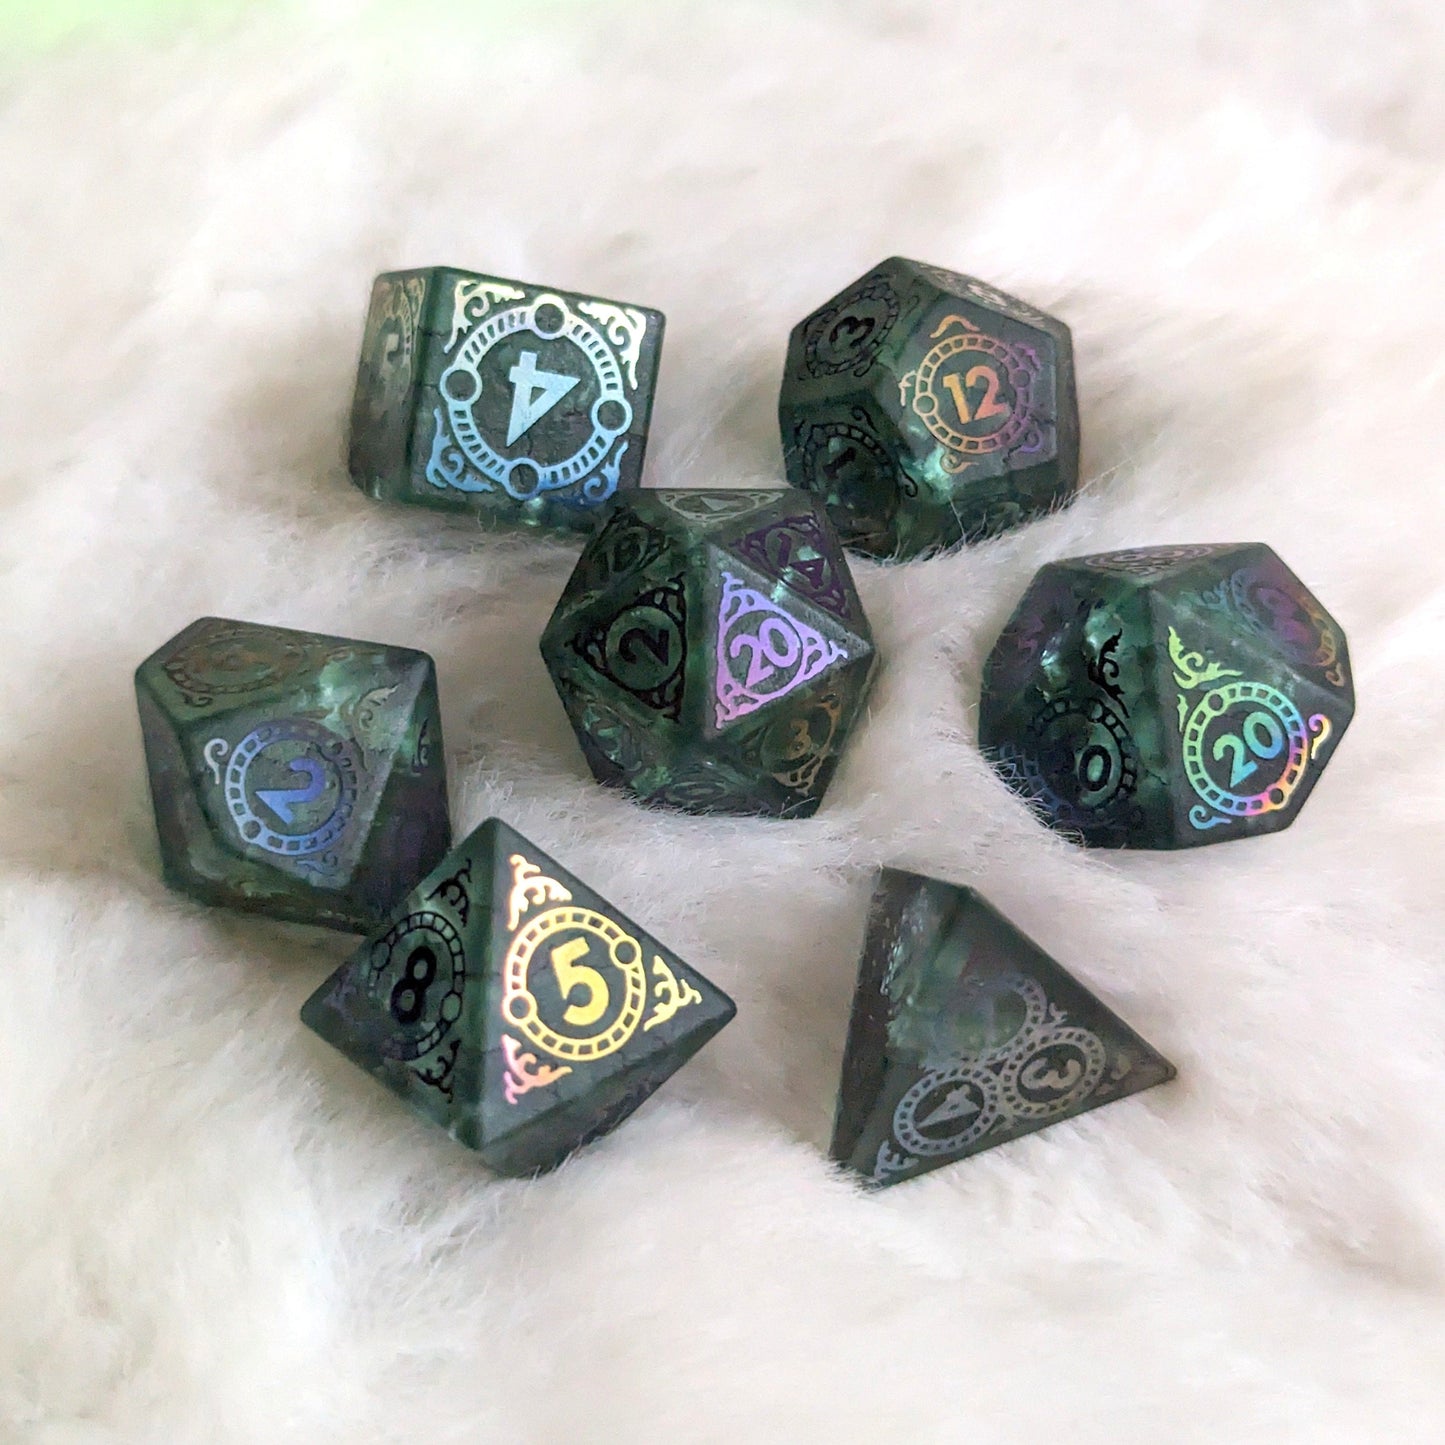 Summoner - Frosted Green Glass 7 Piece Dice Set